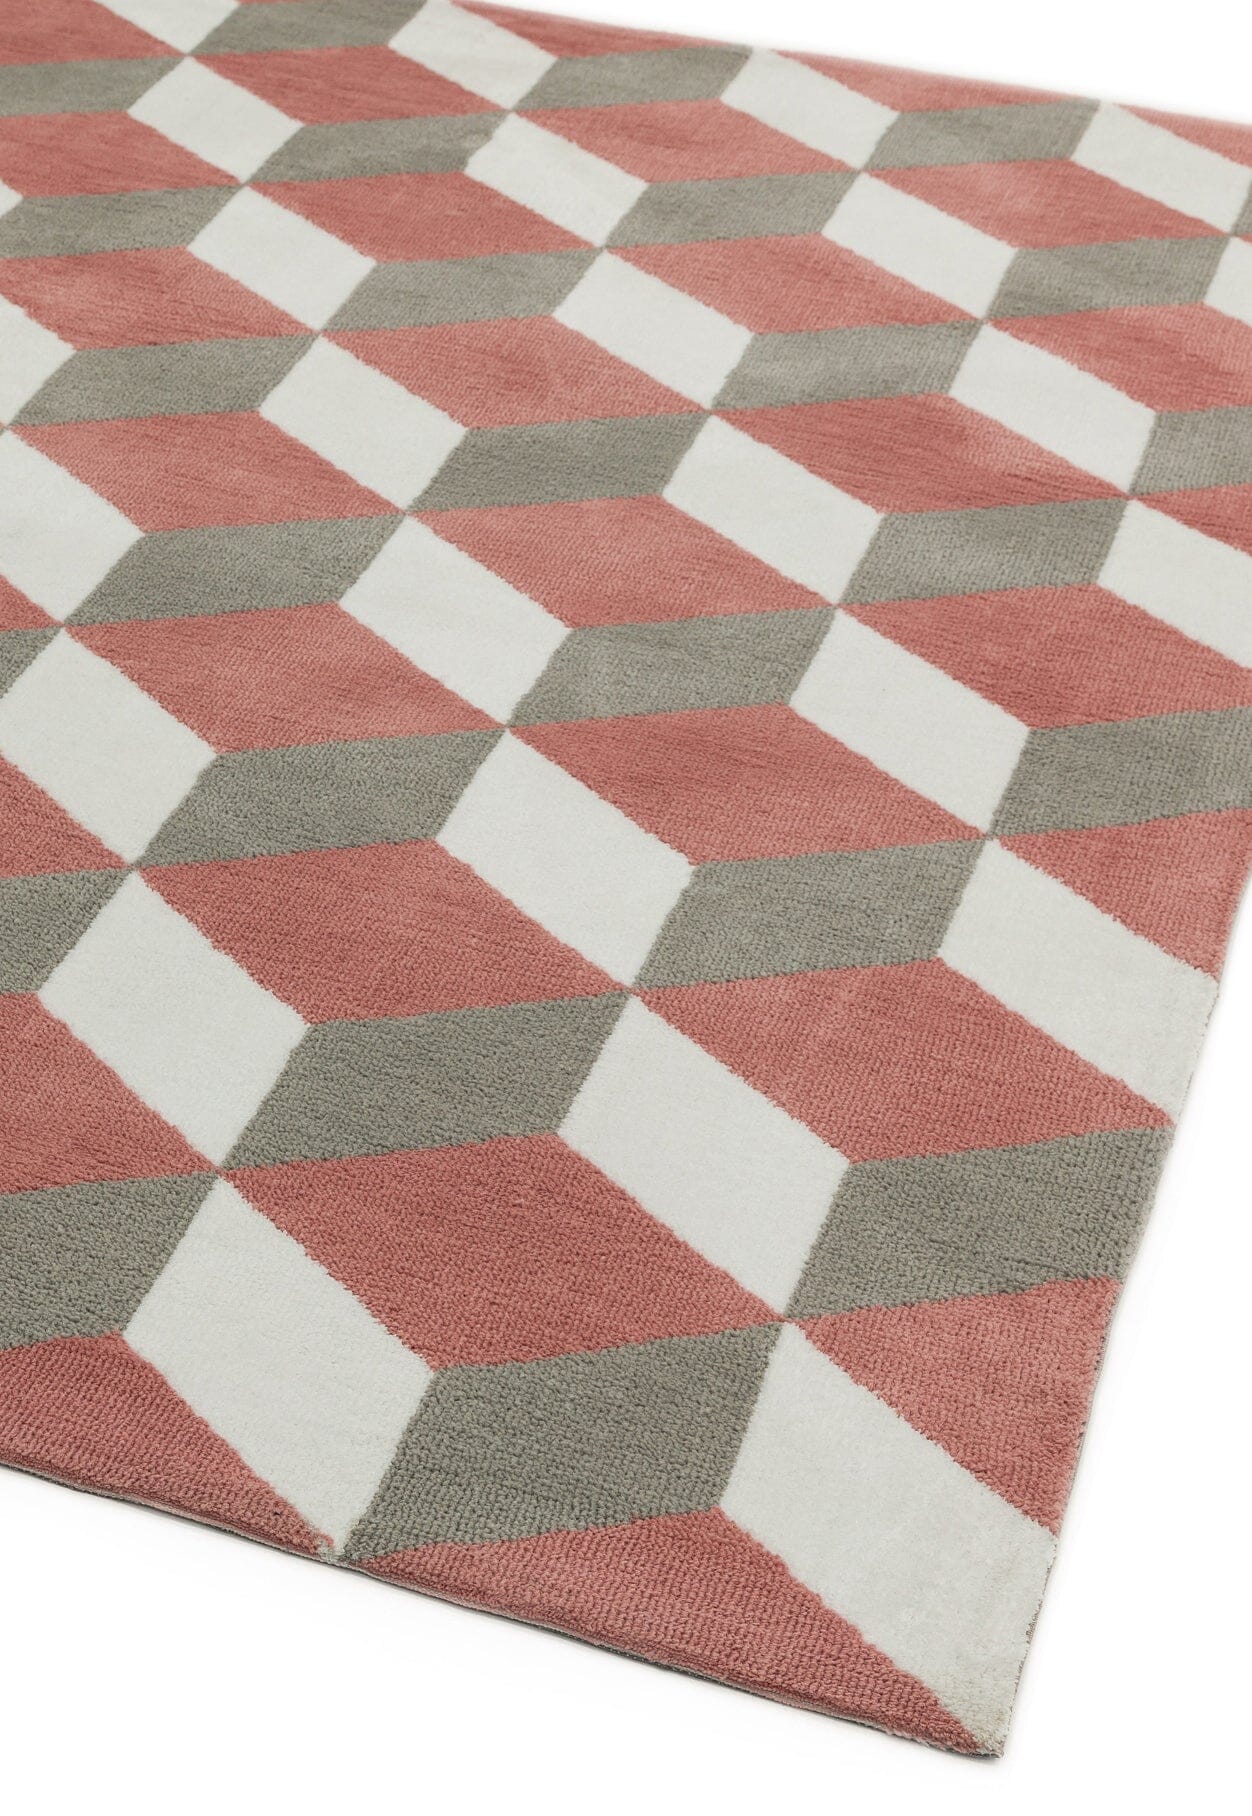 Asiatic Carpets Arlo Machine Knitted Rug Pink Block - 120 x 170cm